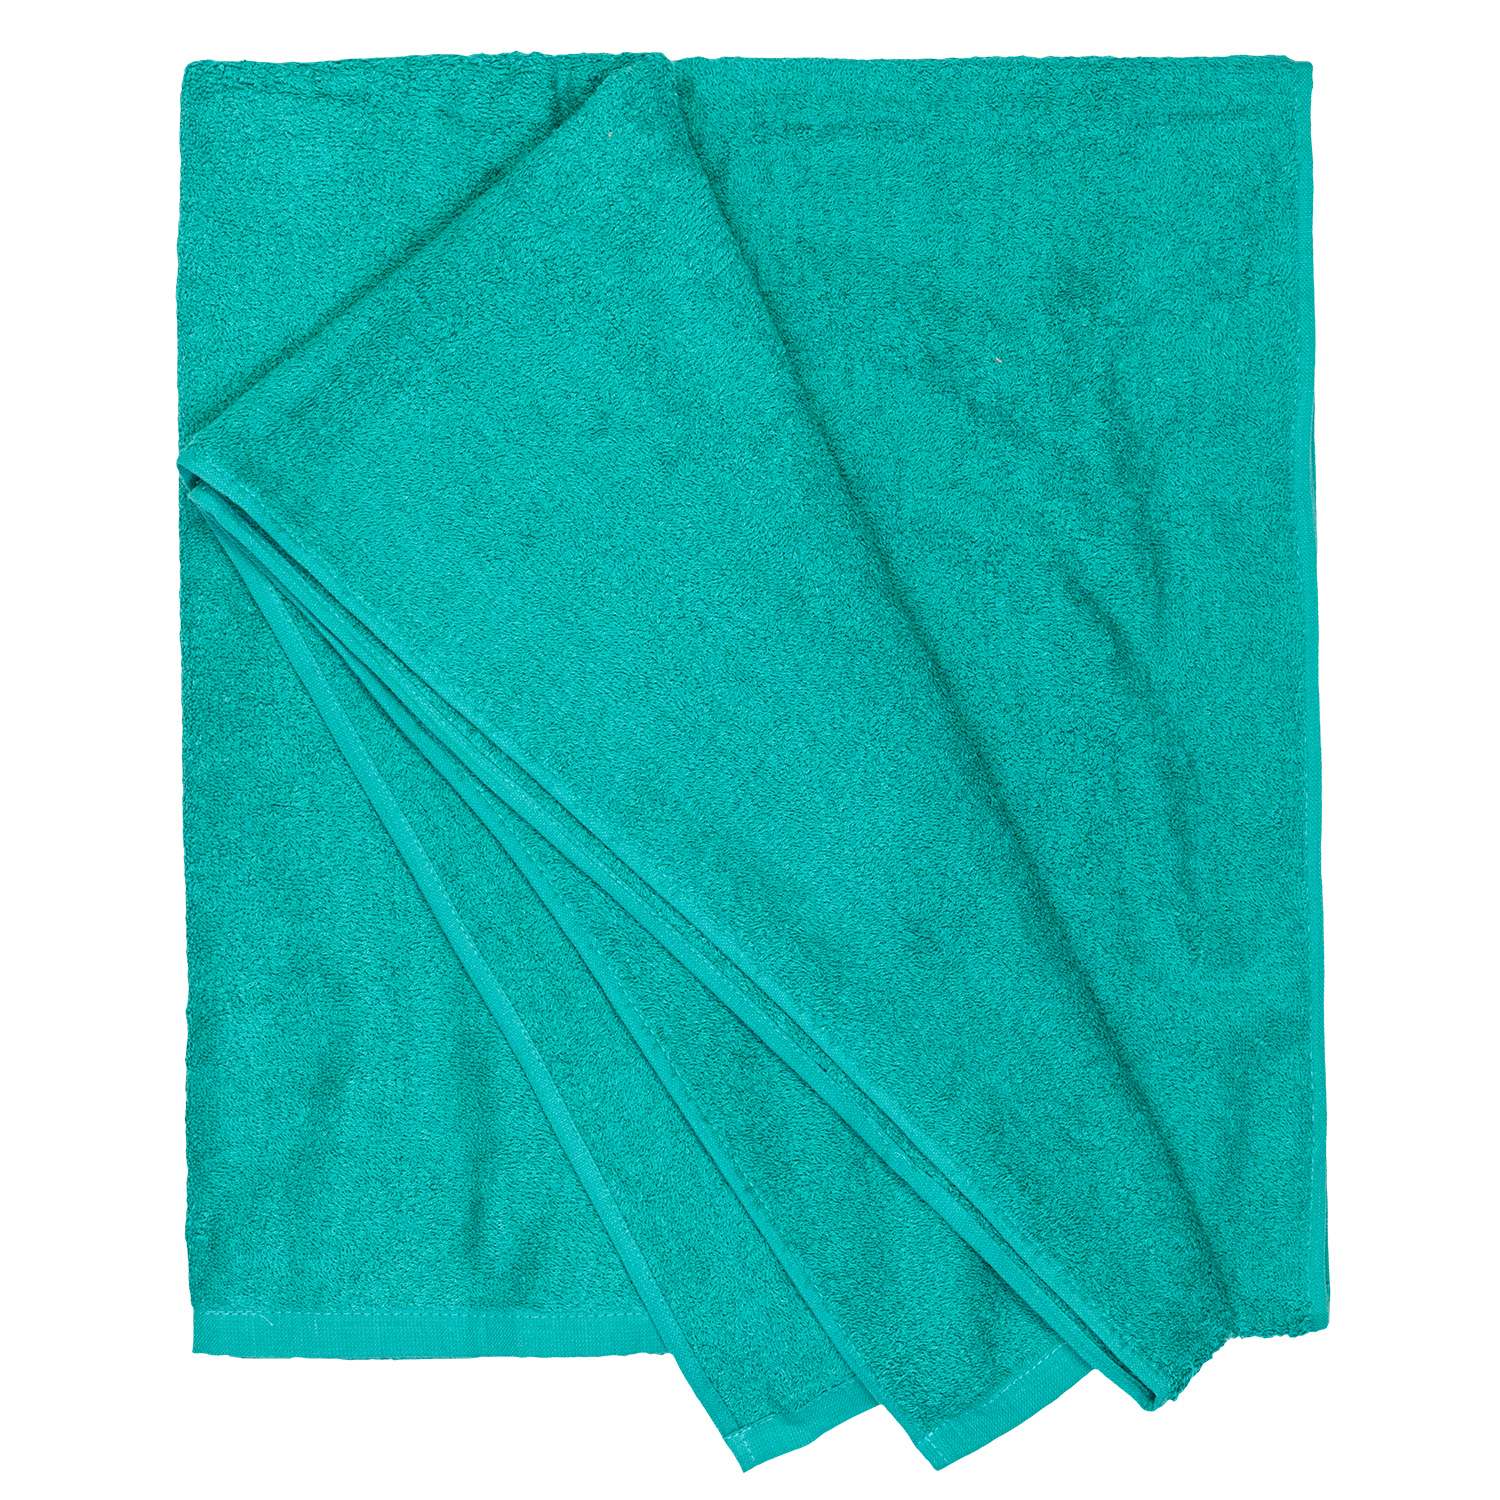 Bath towel series Helsinki in turquoise by Adamo in large sizes 100x220 cm and 155x220 cm